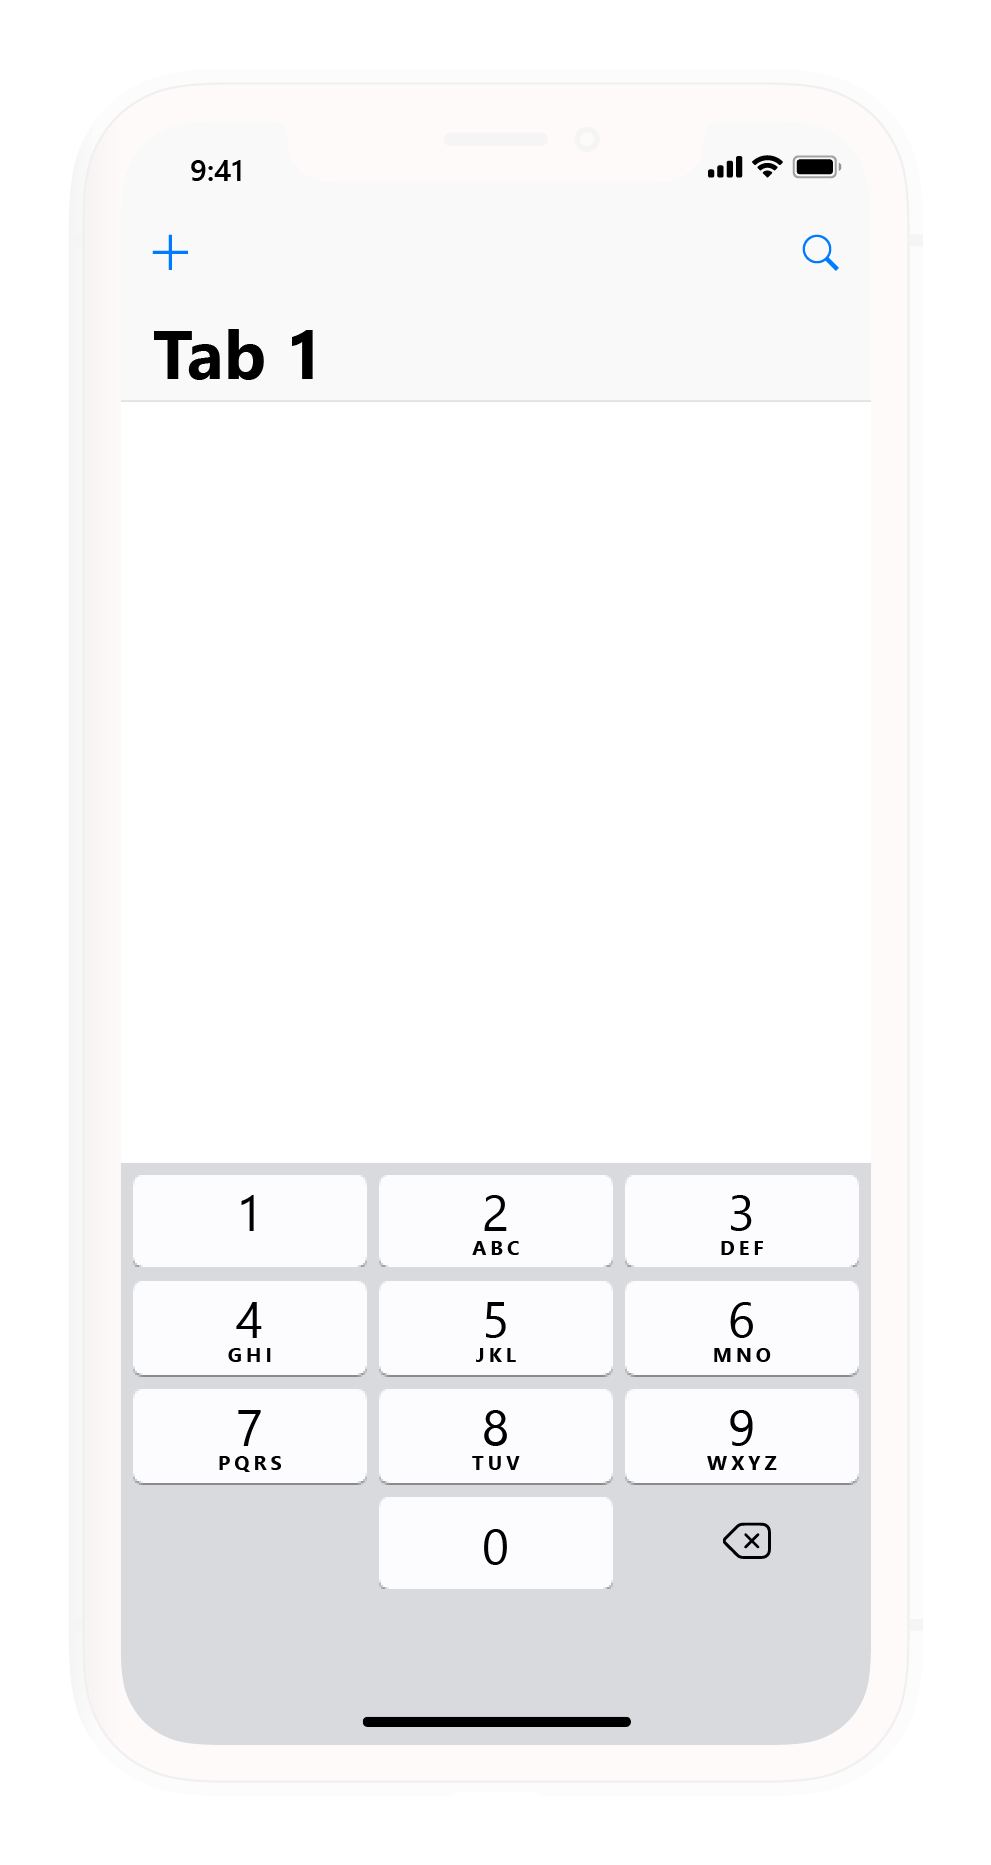 The design of a system keypad